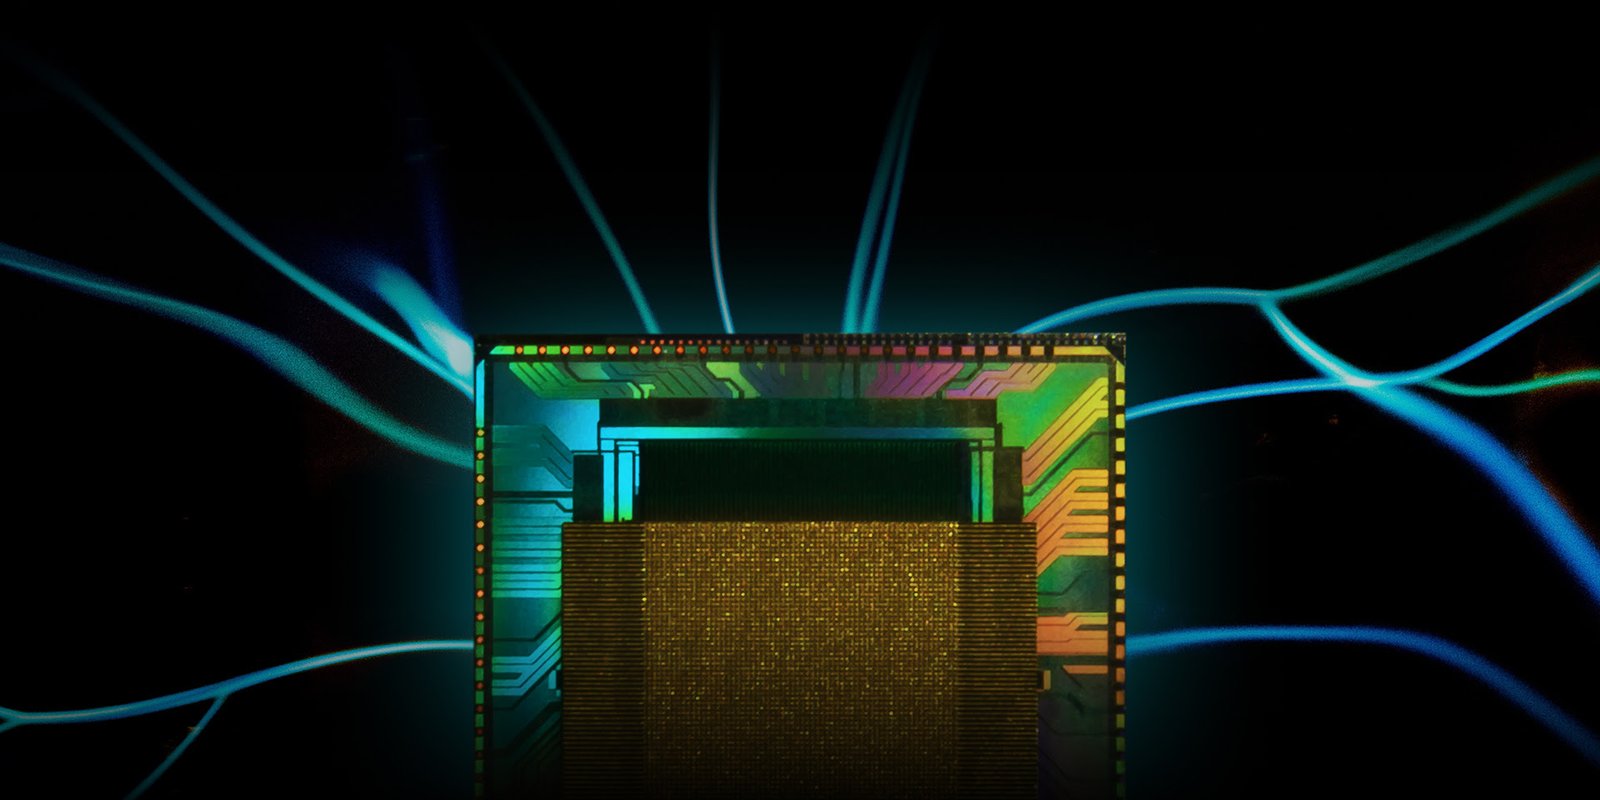 3D CMOS chip for connecting electroactive tissues and organoids to software.